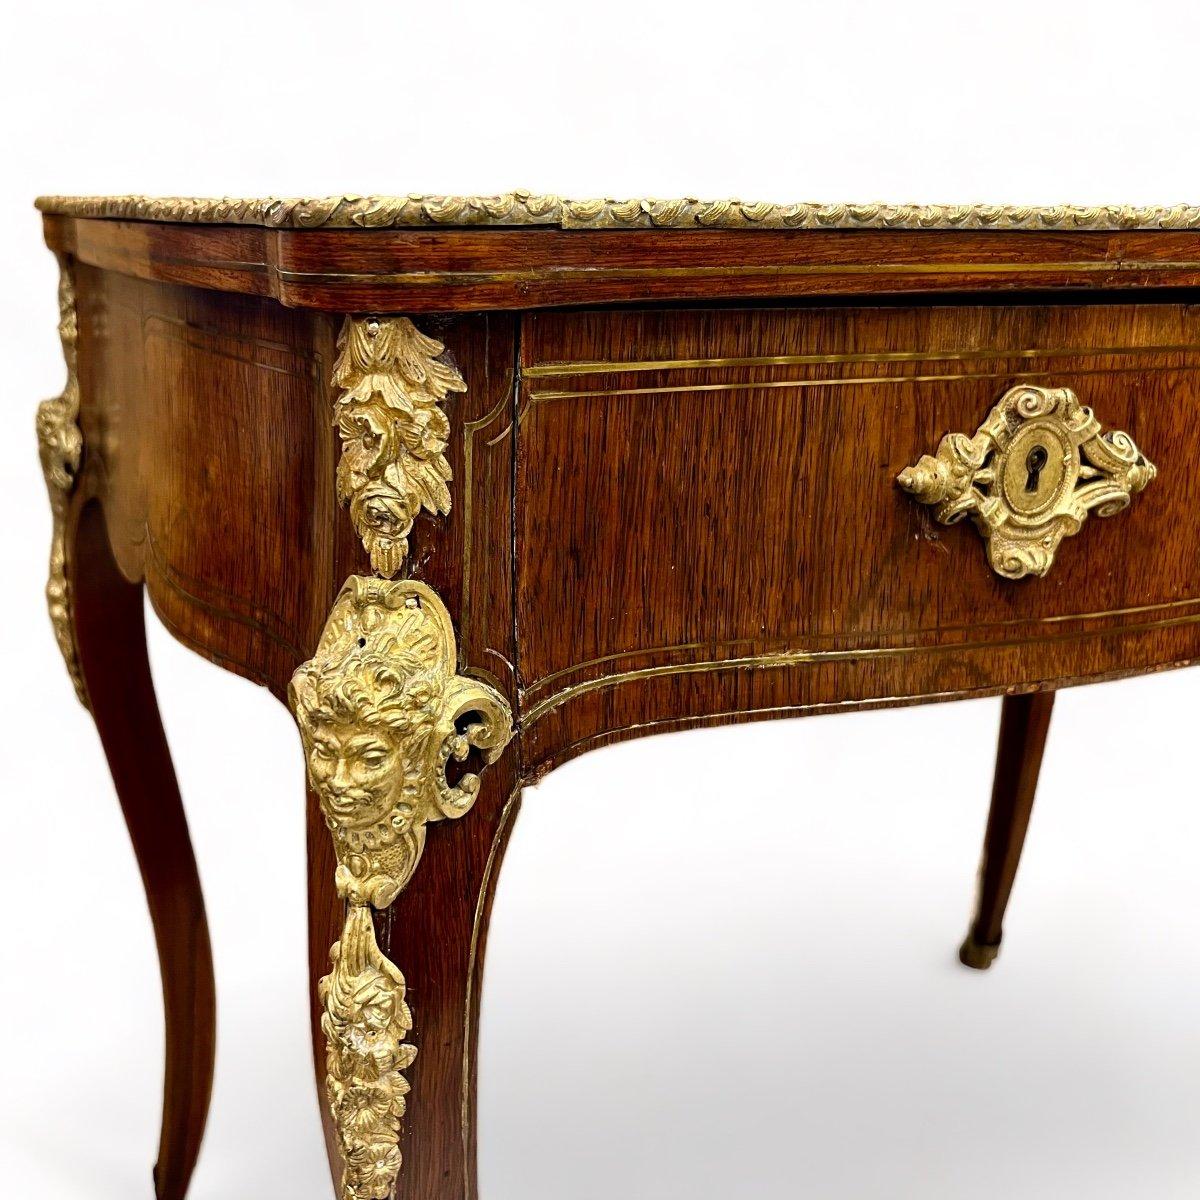 This small writing desk from the 19th century is crafted in rosewood with inserted brass fillets. It exhibits a transitional blend of elements representative of both Louis XV and Louis XVI styles, notably seen in its curved legs. The desk's legs and